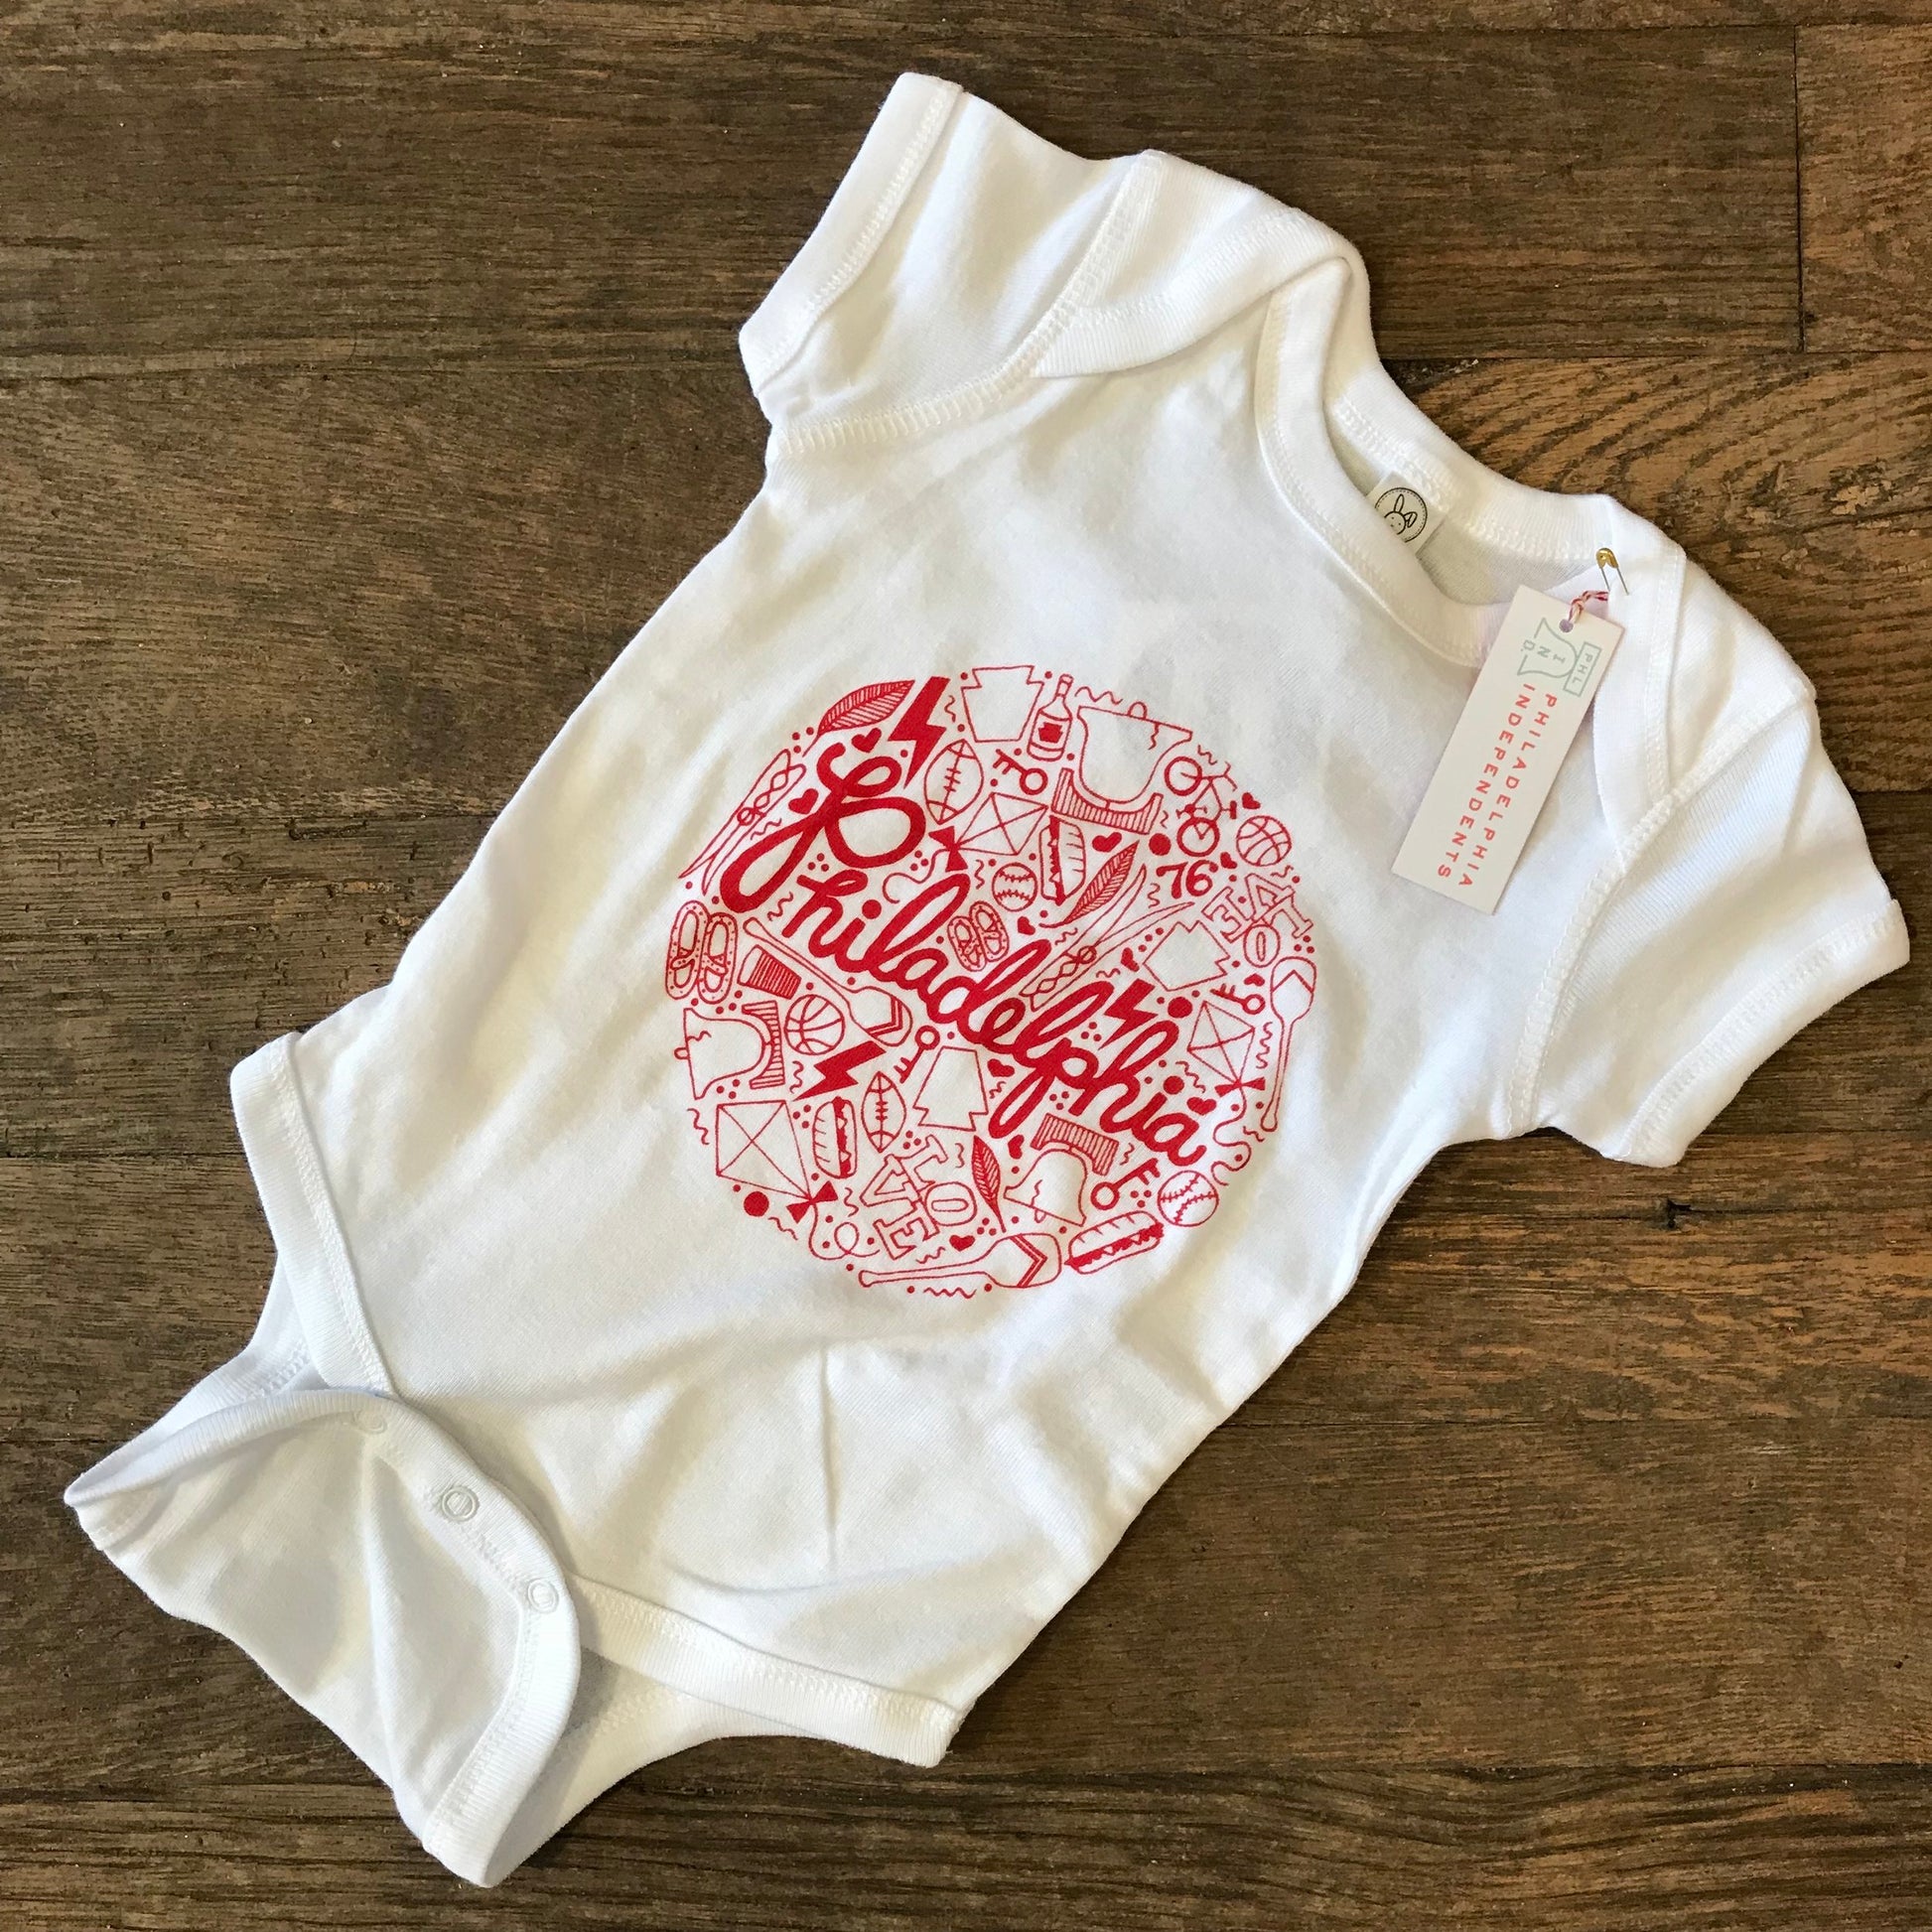 Sentence with replaced product:
Philadelphia Baby Onesie from exit343design with a red graphic print representing the Liberty Bell in Philadelphia, displayed on a wooden surface.